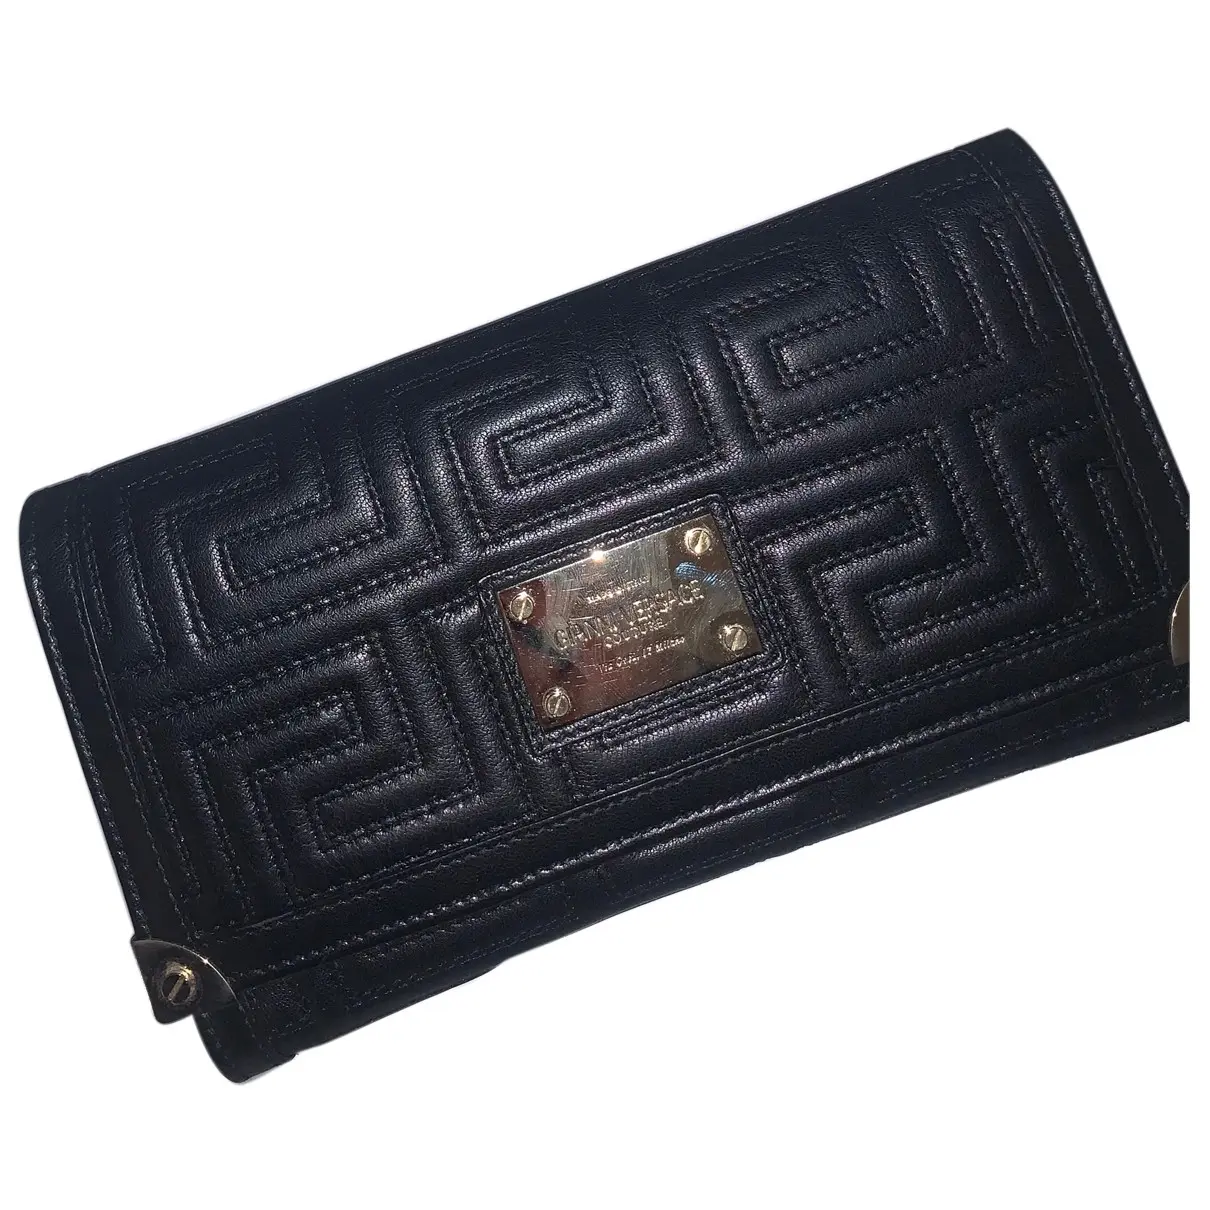 Leather clutch bag Gianni Versace